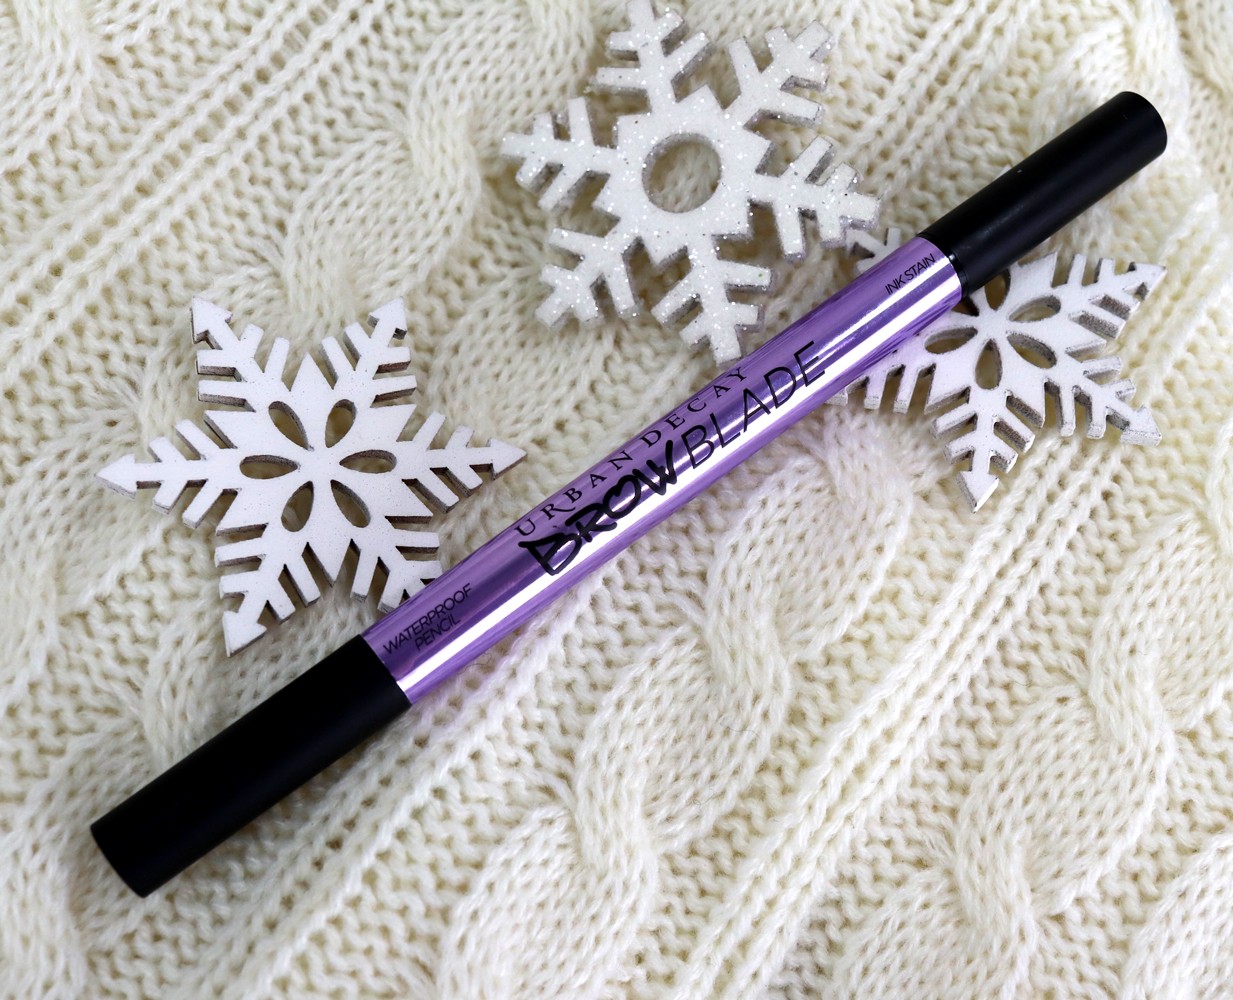 Urban Decay Brow Blade Review and Swatches